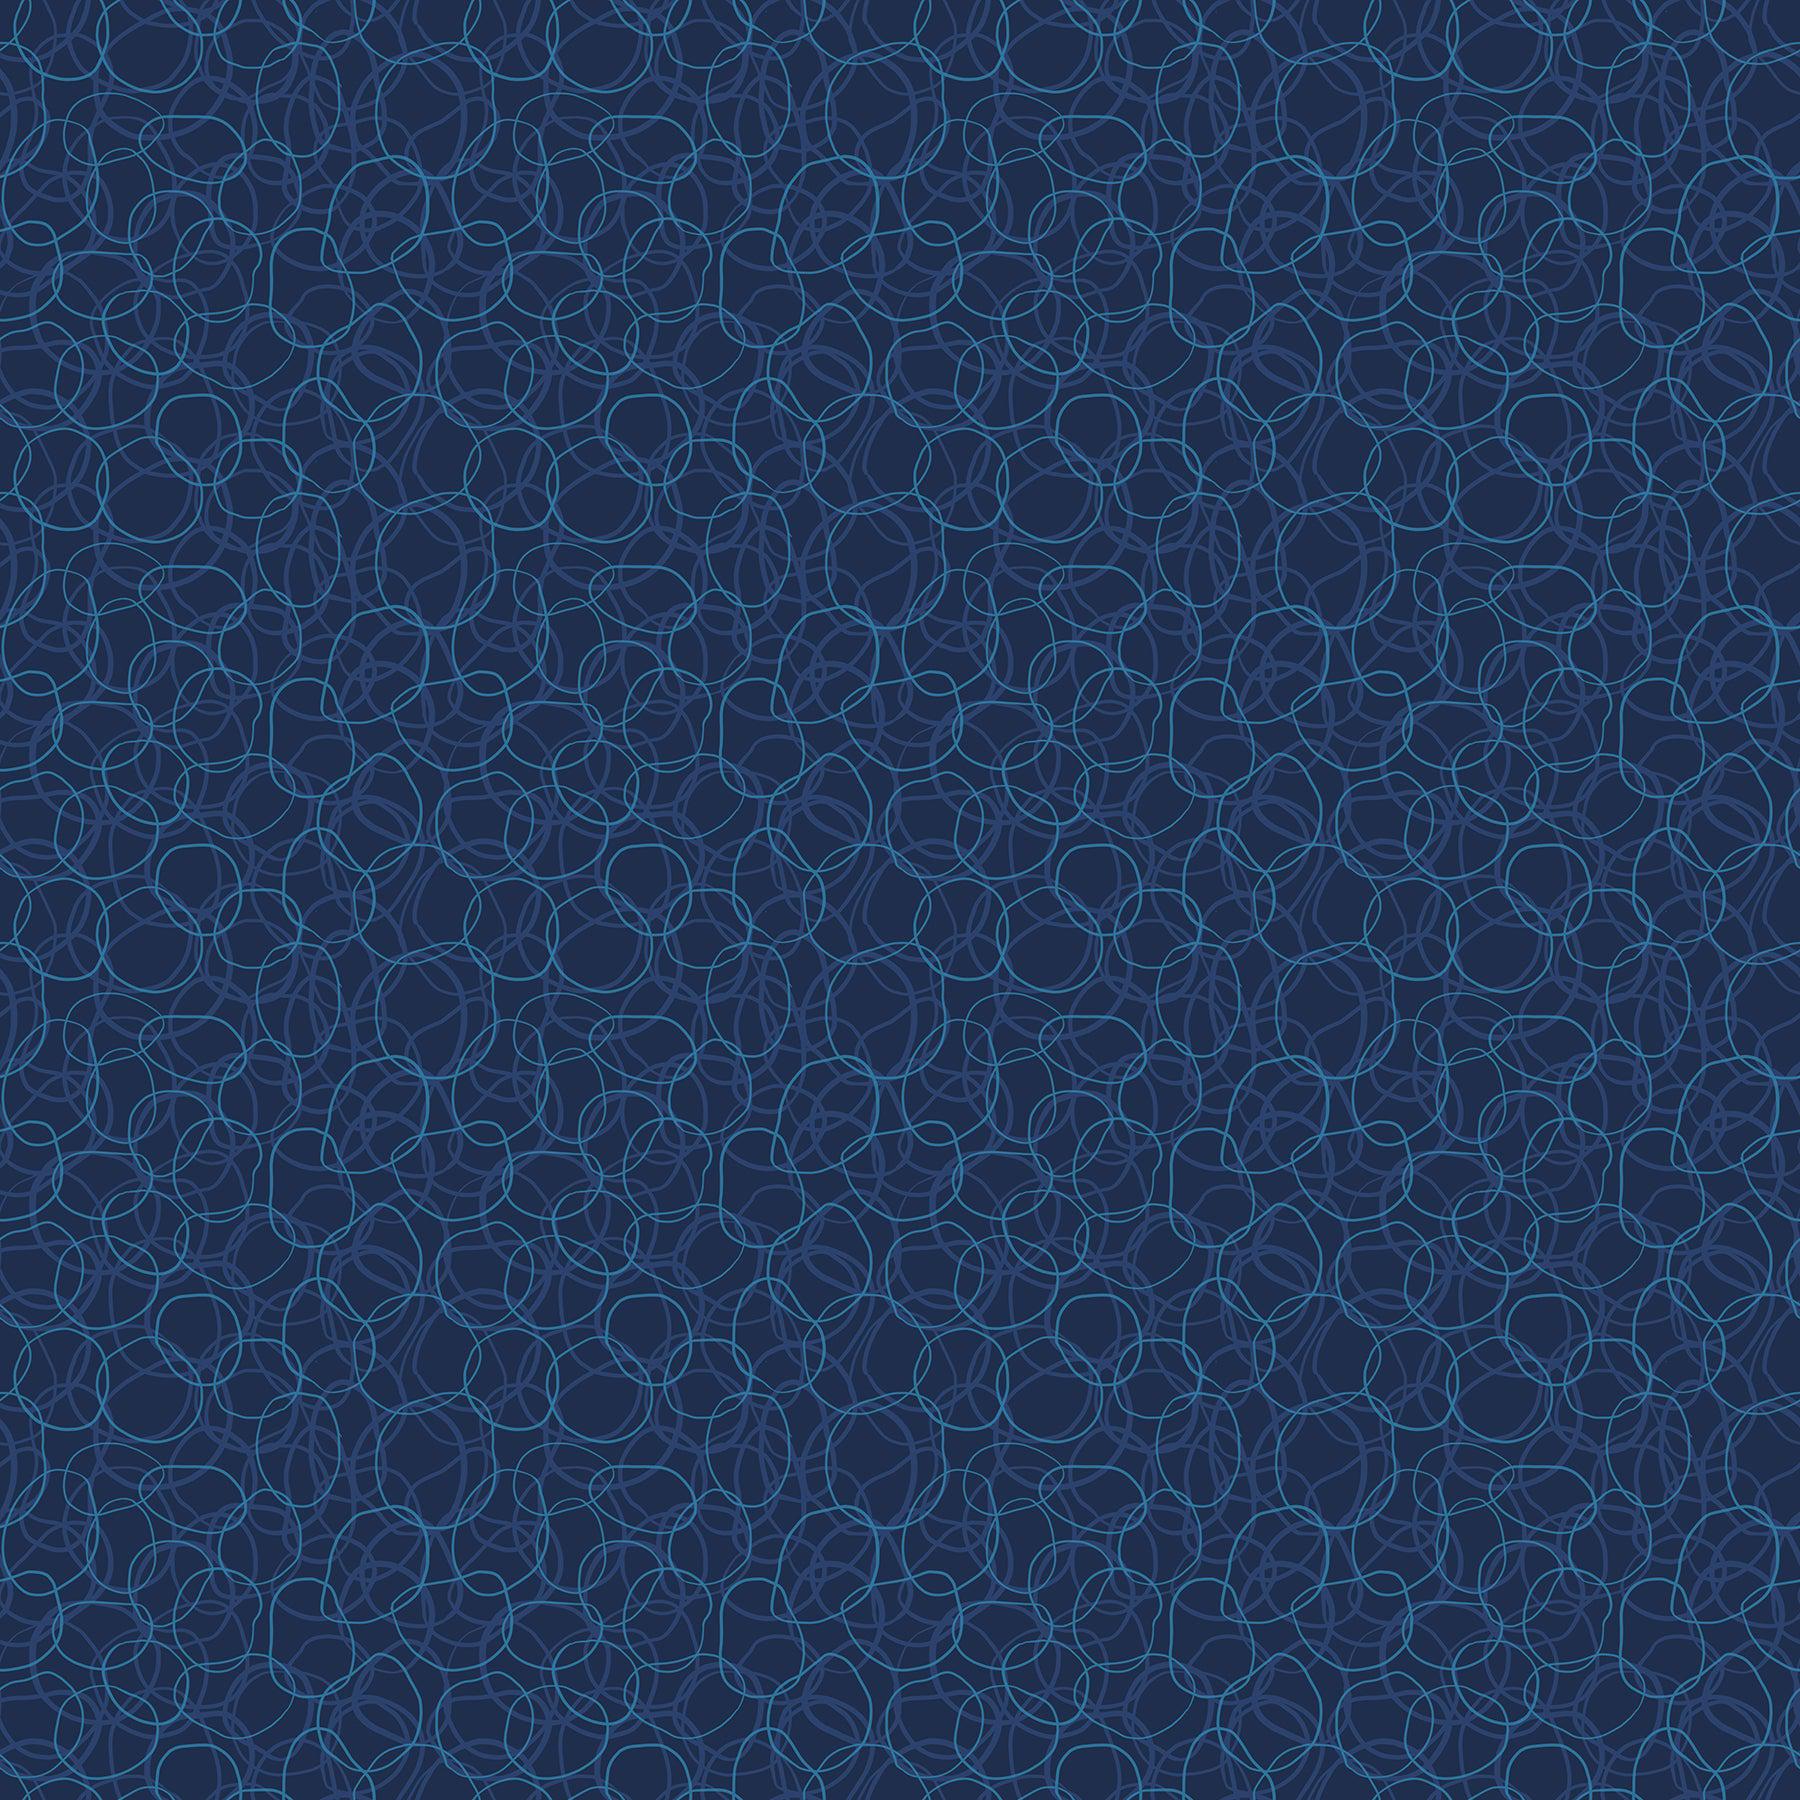 Ruby Star Society-Rubber Bands Navy-fabric-gather here online